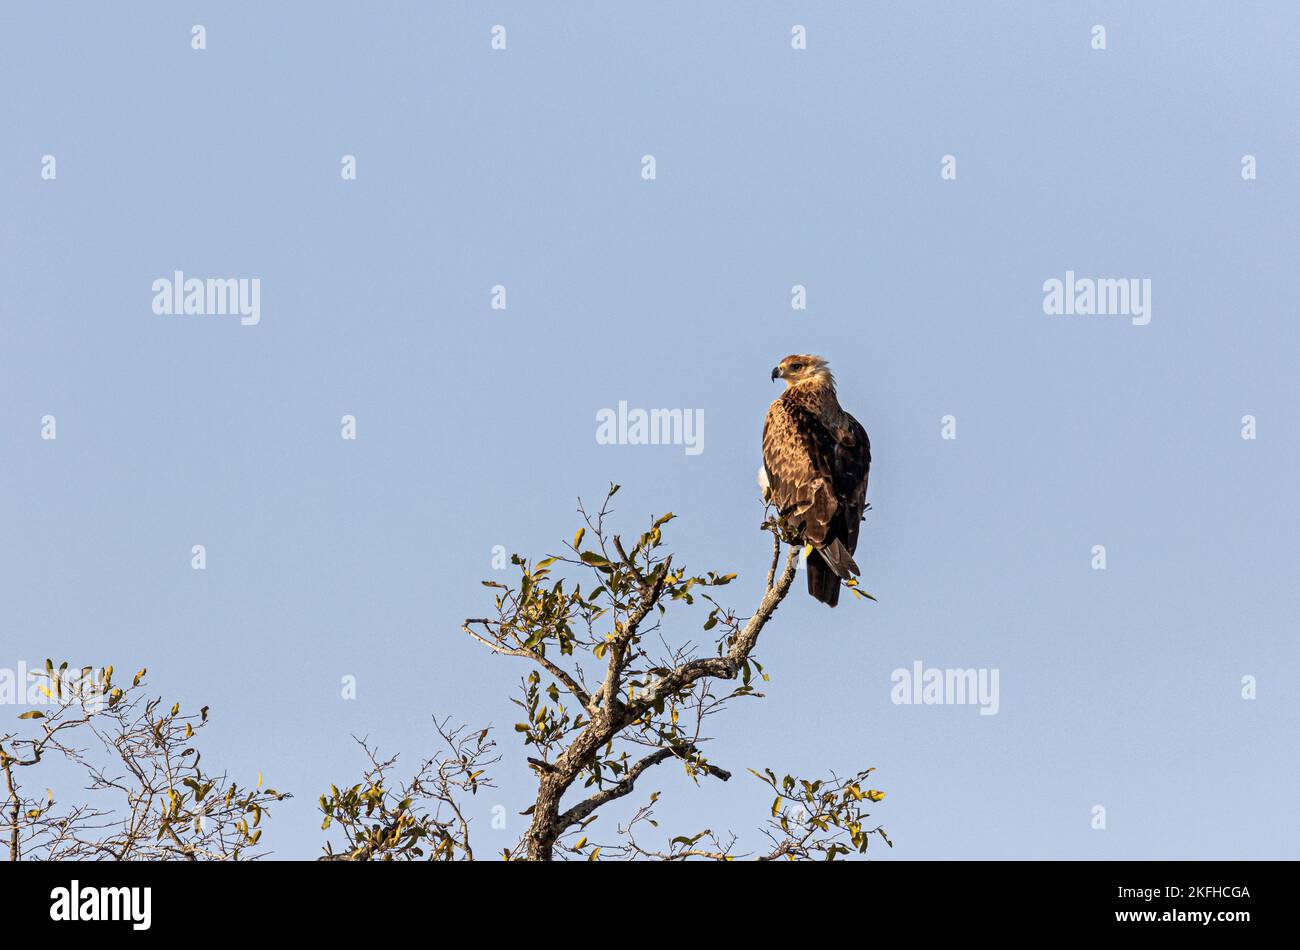 Wahlberg's eagle Stock Photo